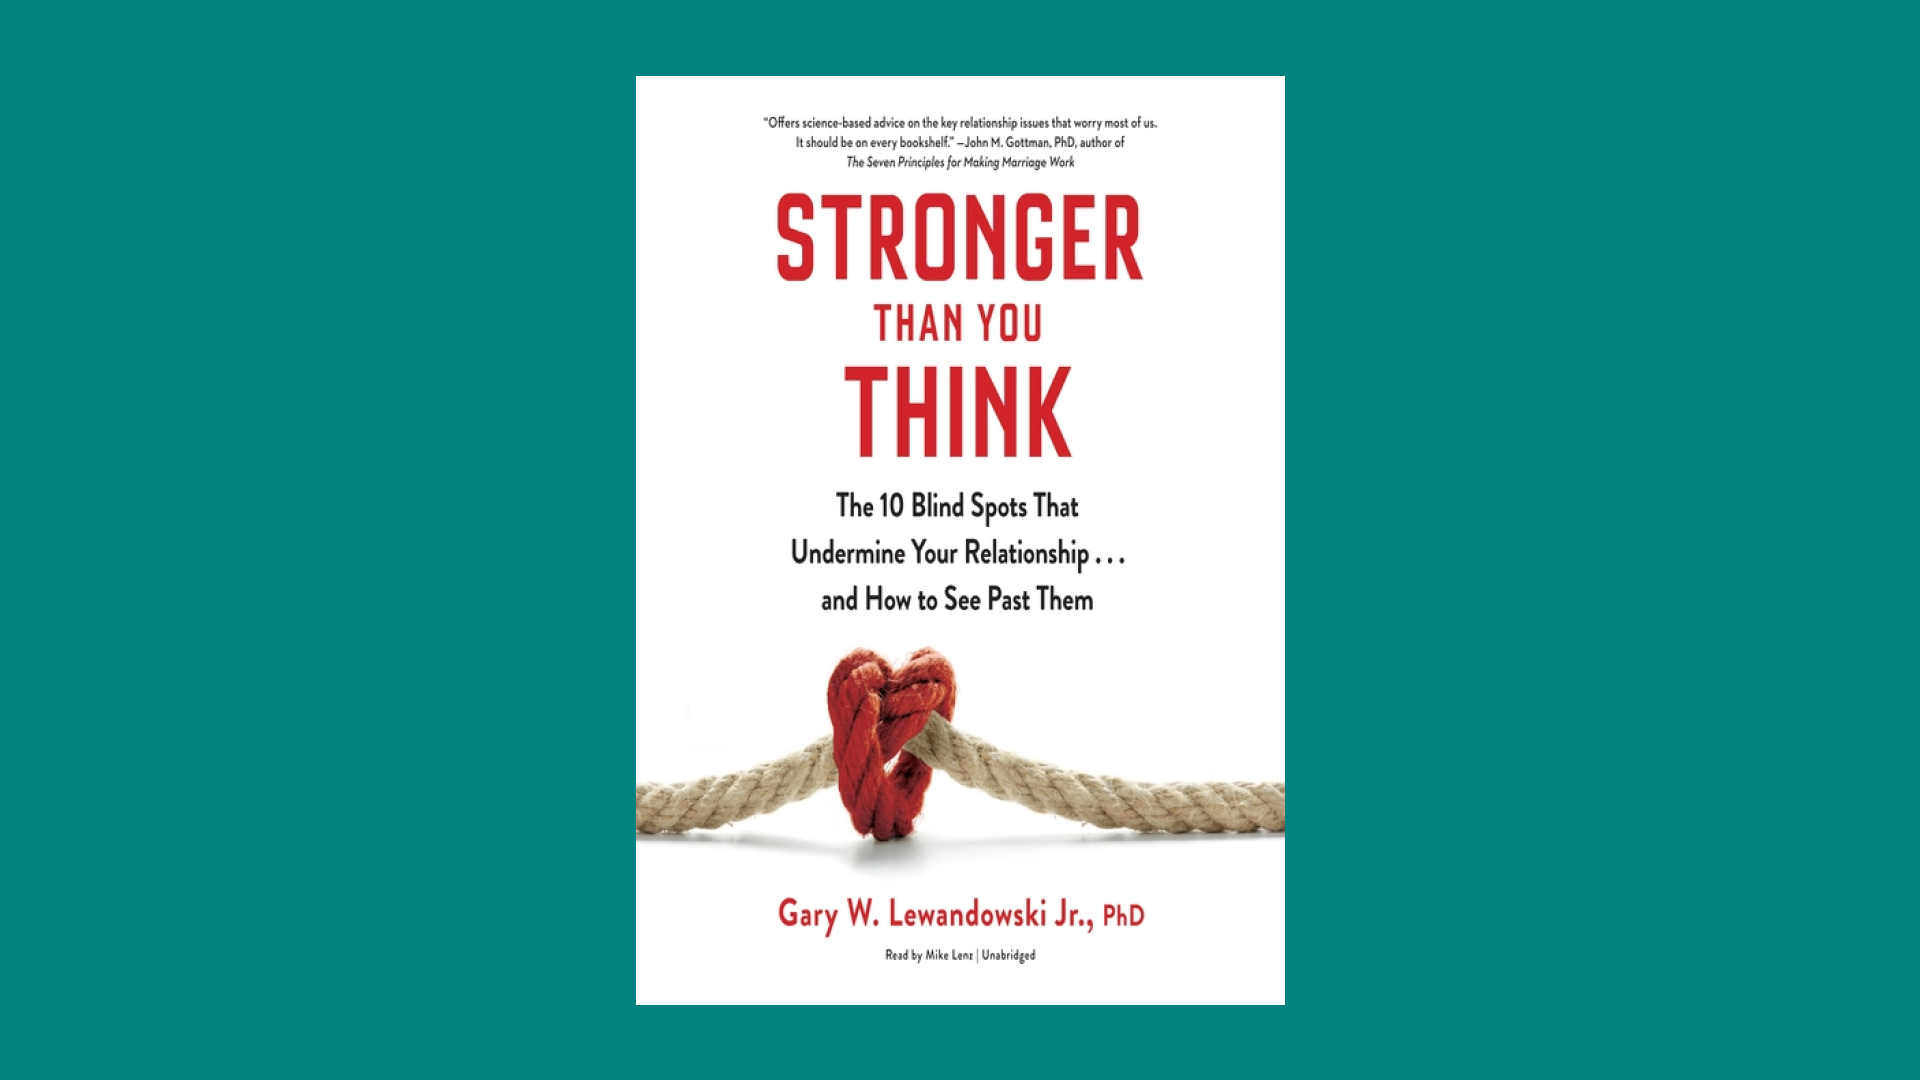 “Stronger Than You Think: The 10 Blind Spots That Undermine Your Relationship...and How to See Past Them” by Gary W. Lewandowski Jr., Ph.D.